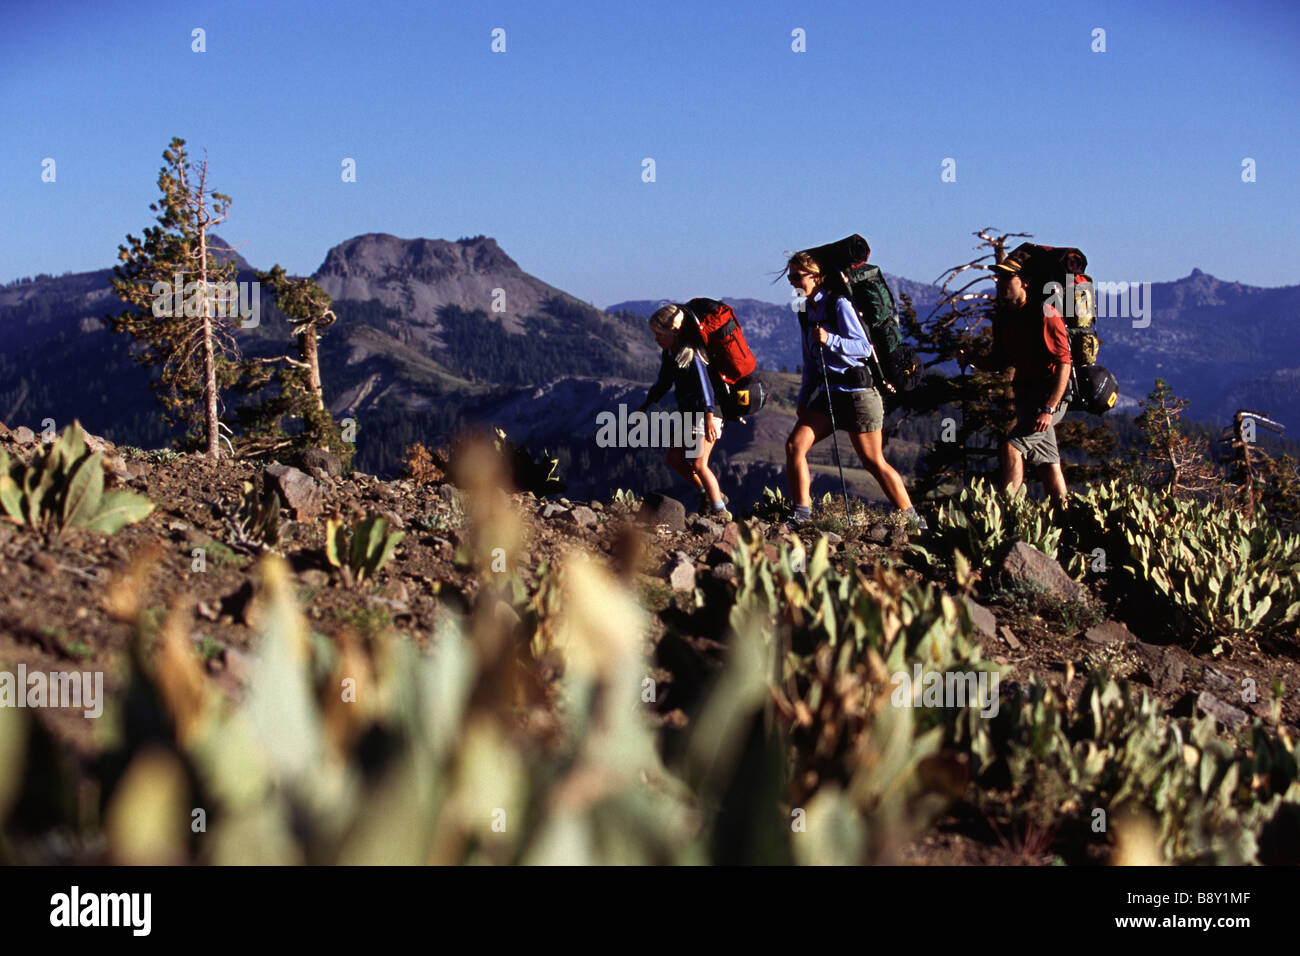 Family hiking a mountain, Pacific Crest Trail, California, USA Stock Photo